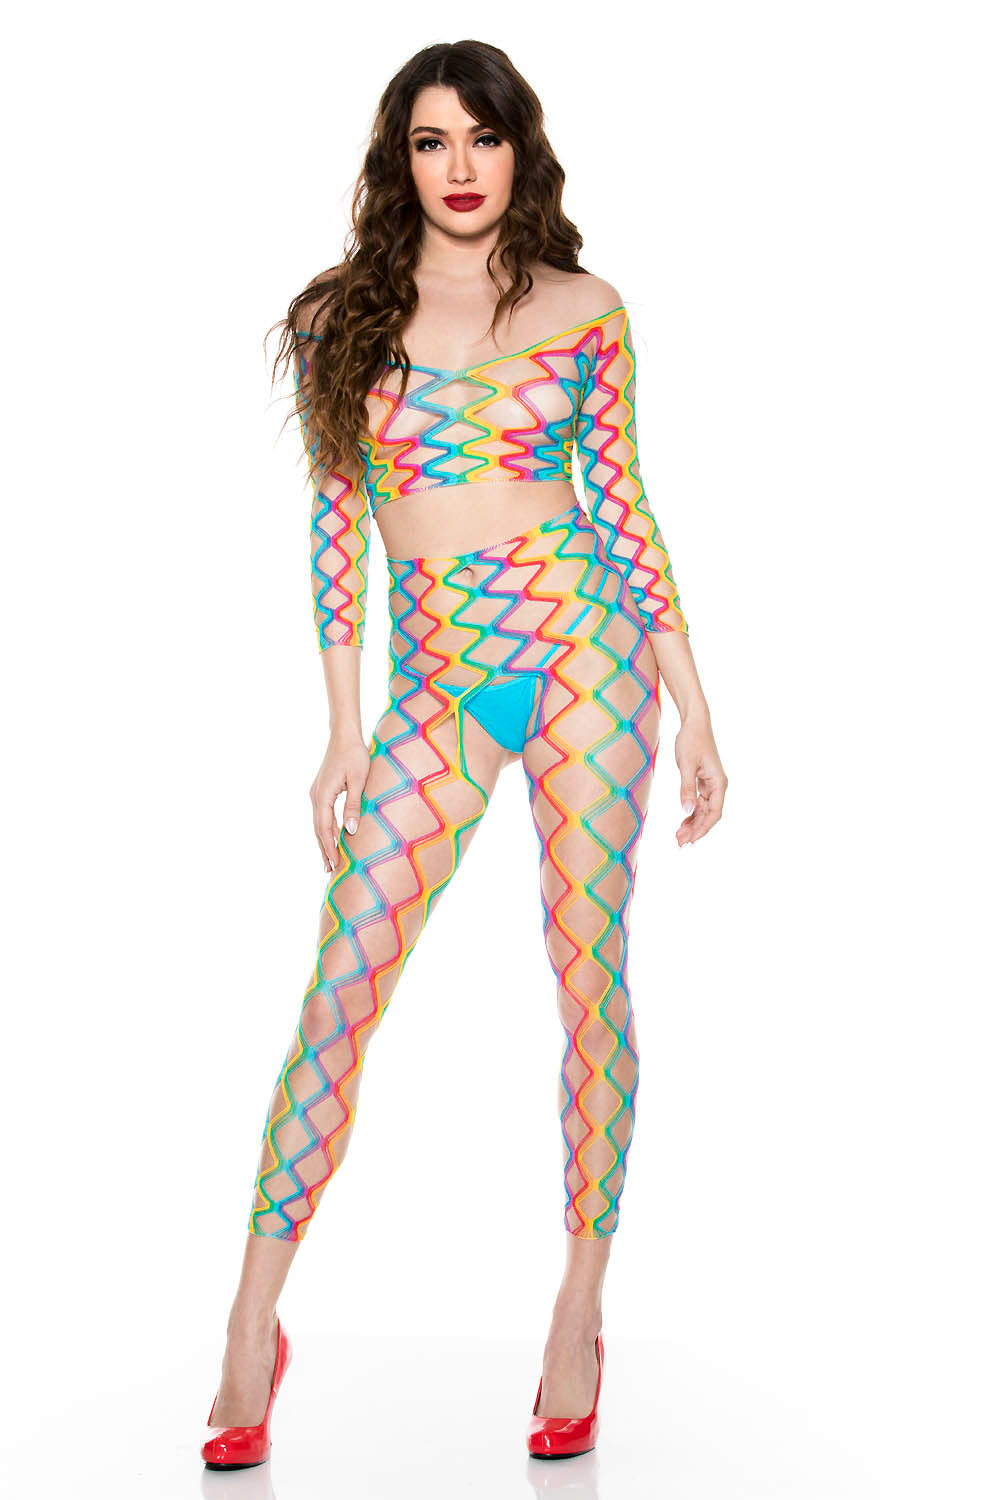 Rainbow Fence Net Long Sleeve Crop Top & Crotchless Tights Set